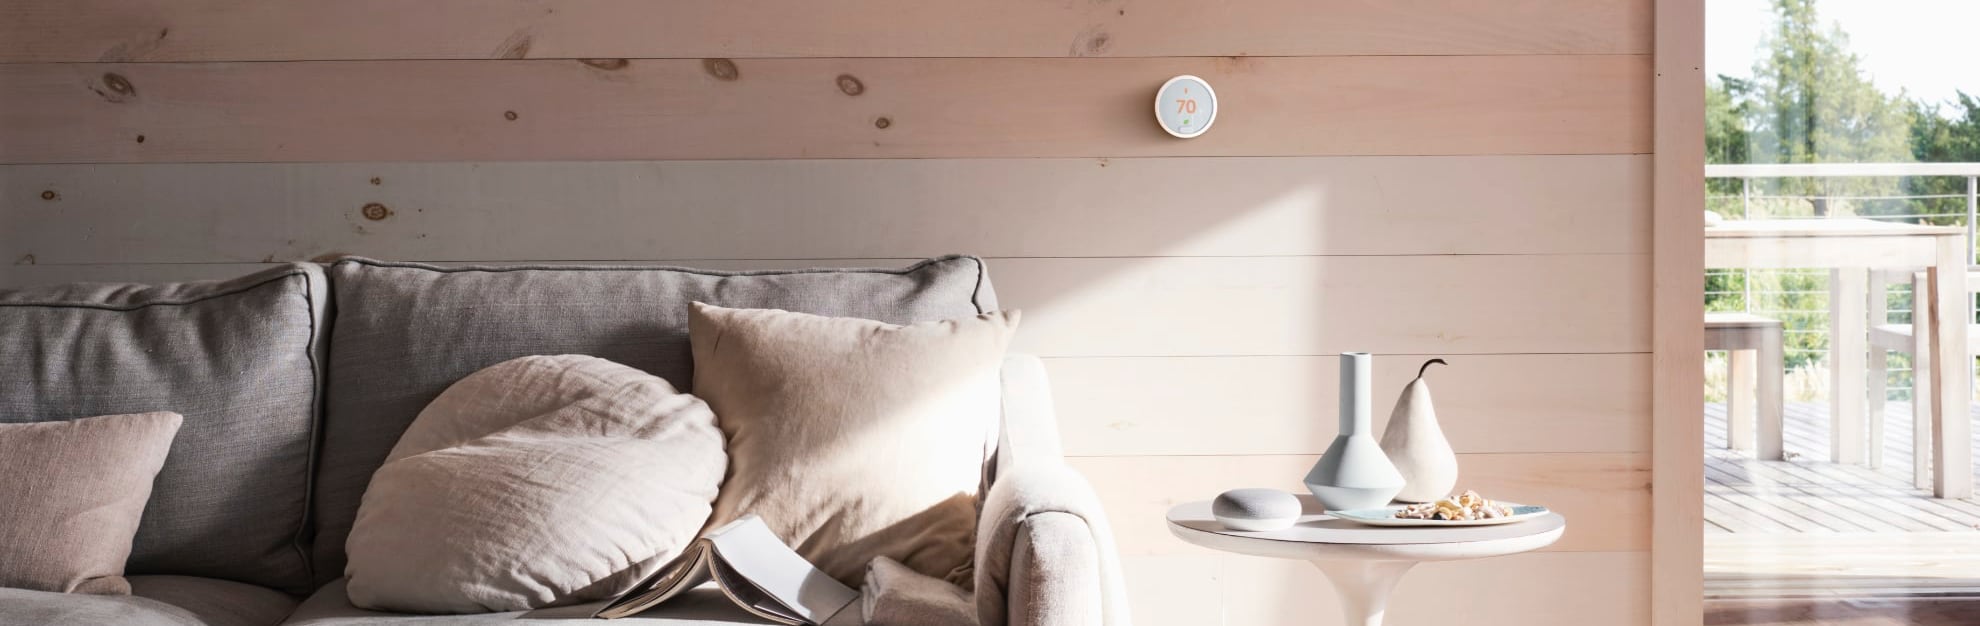 Vivint Home Automation in Tallahassee